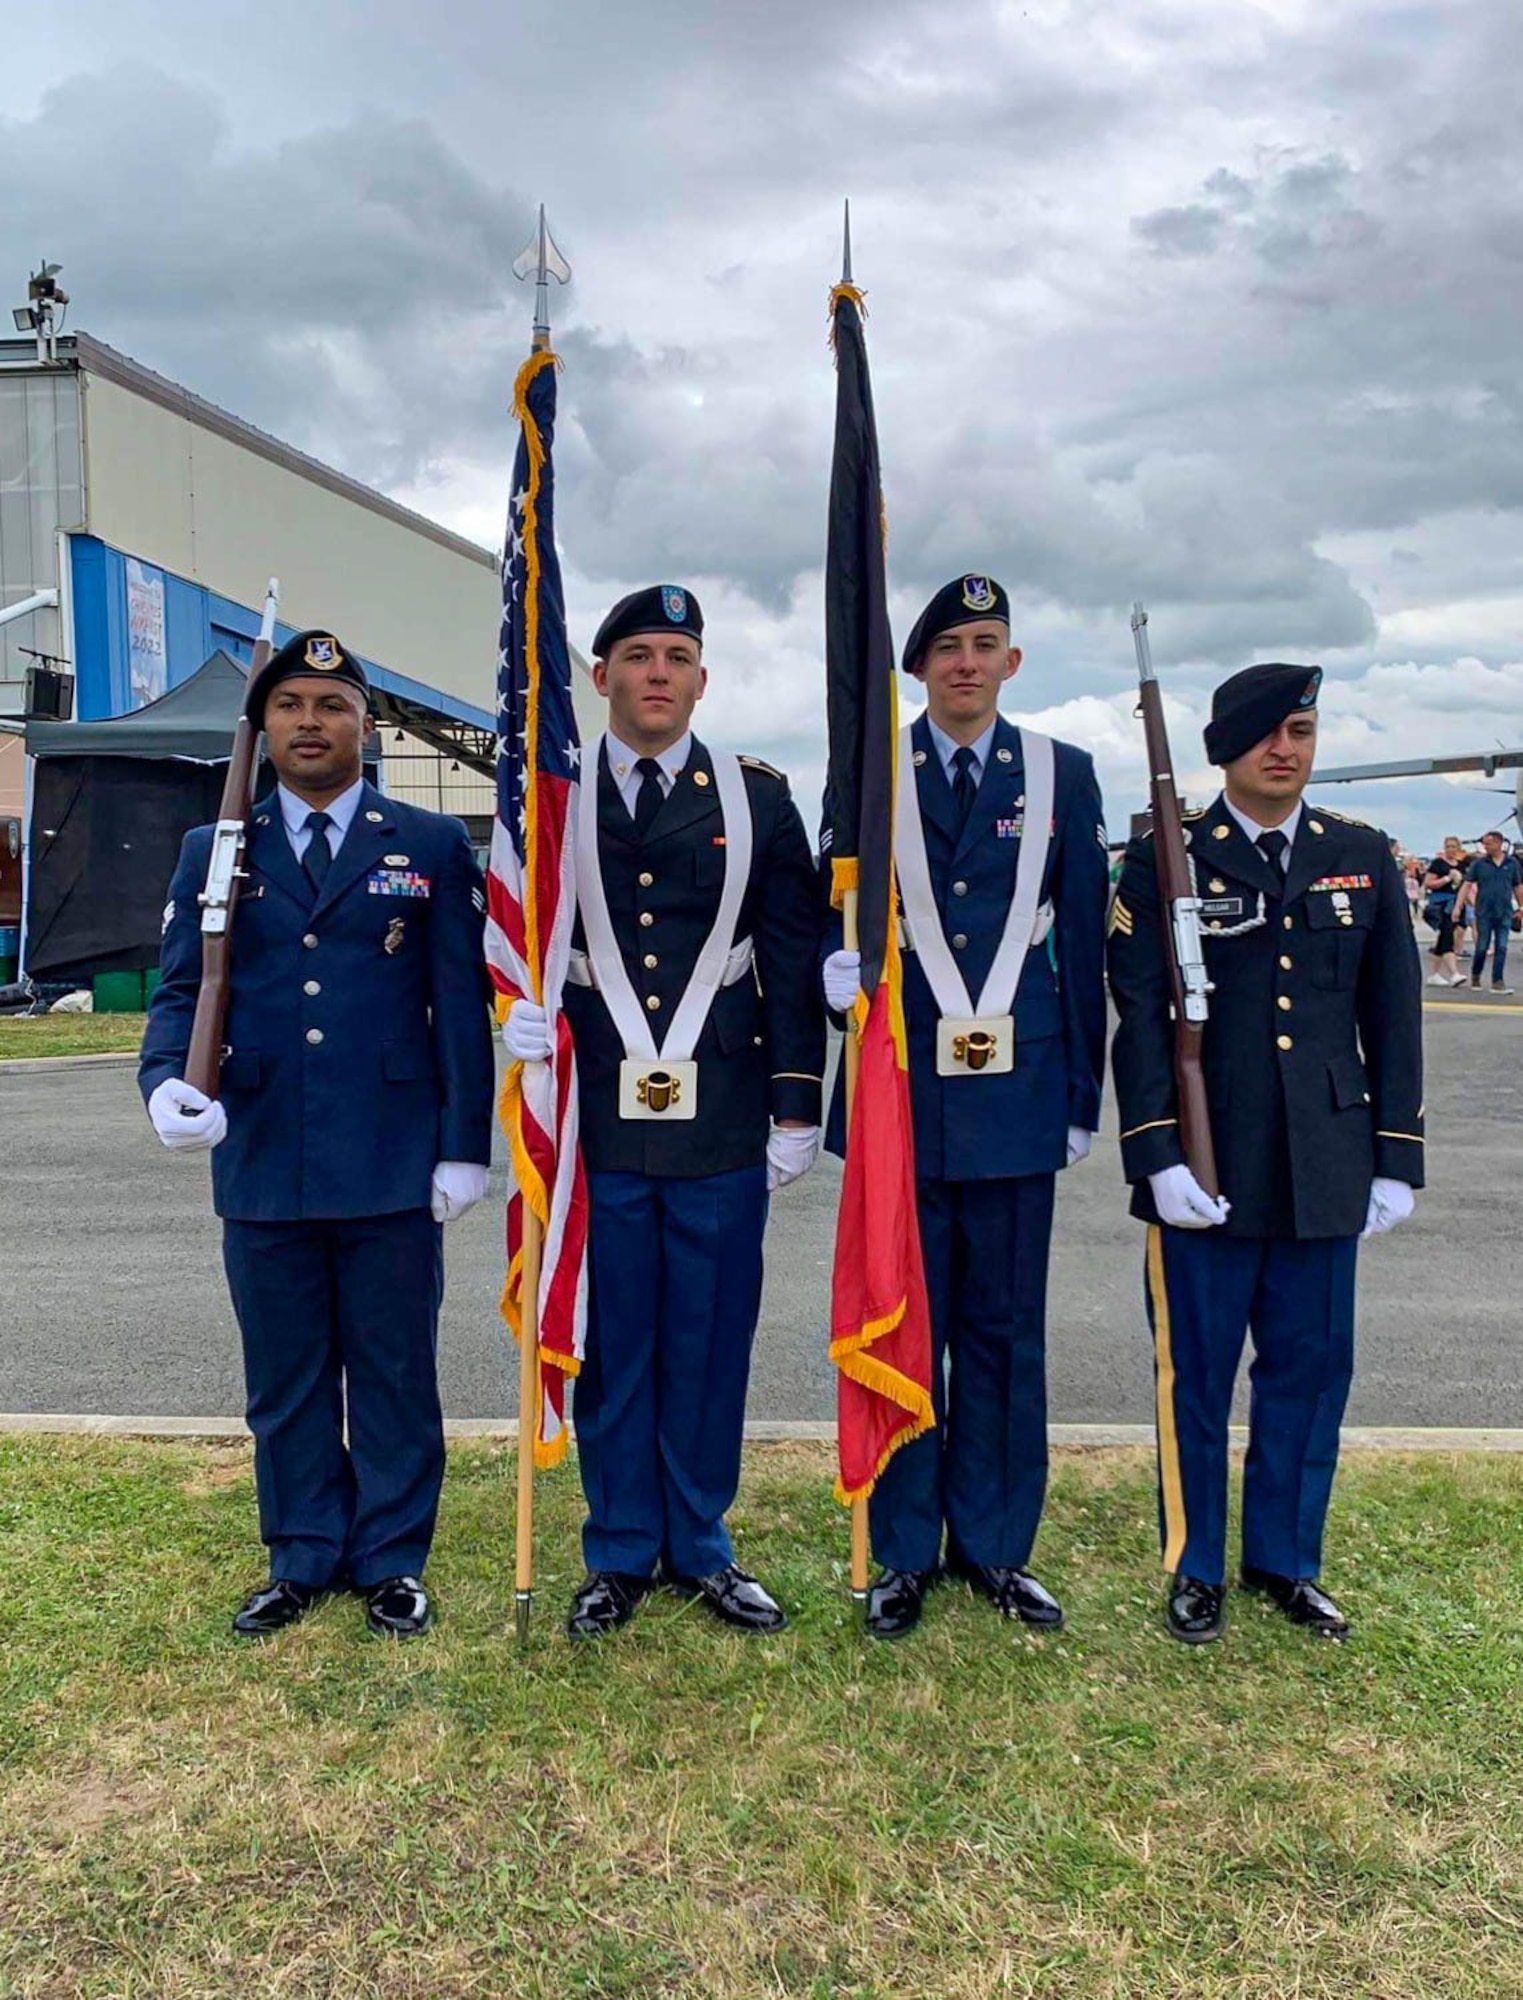 Members of the Joint Honor Guard stand for a photo